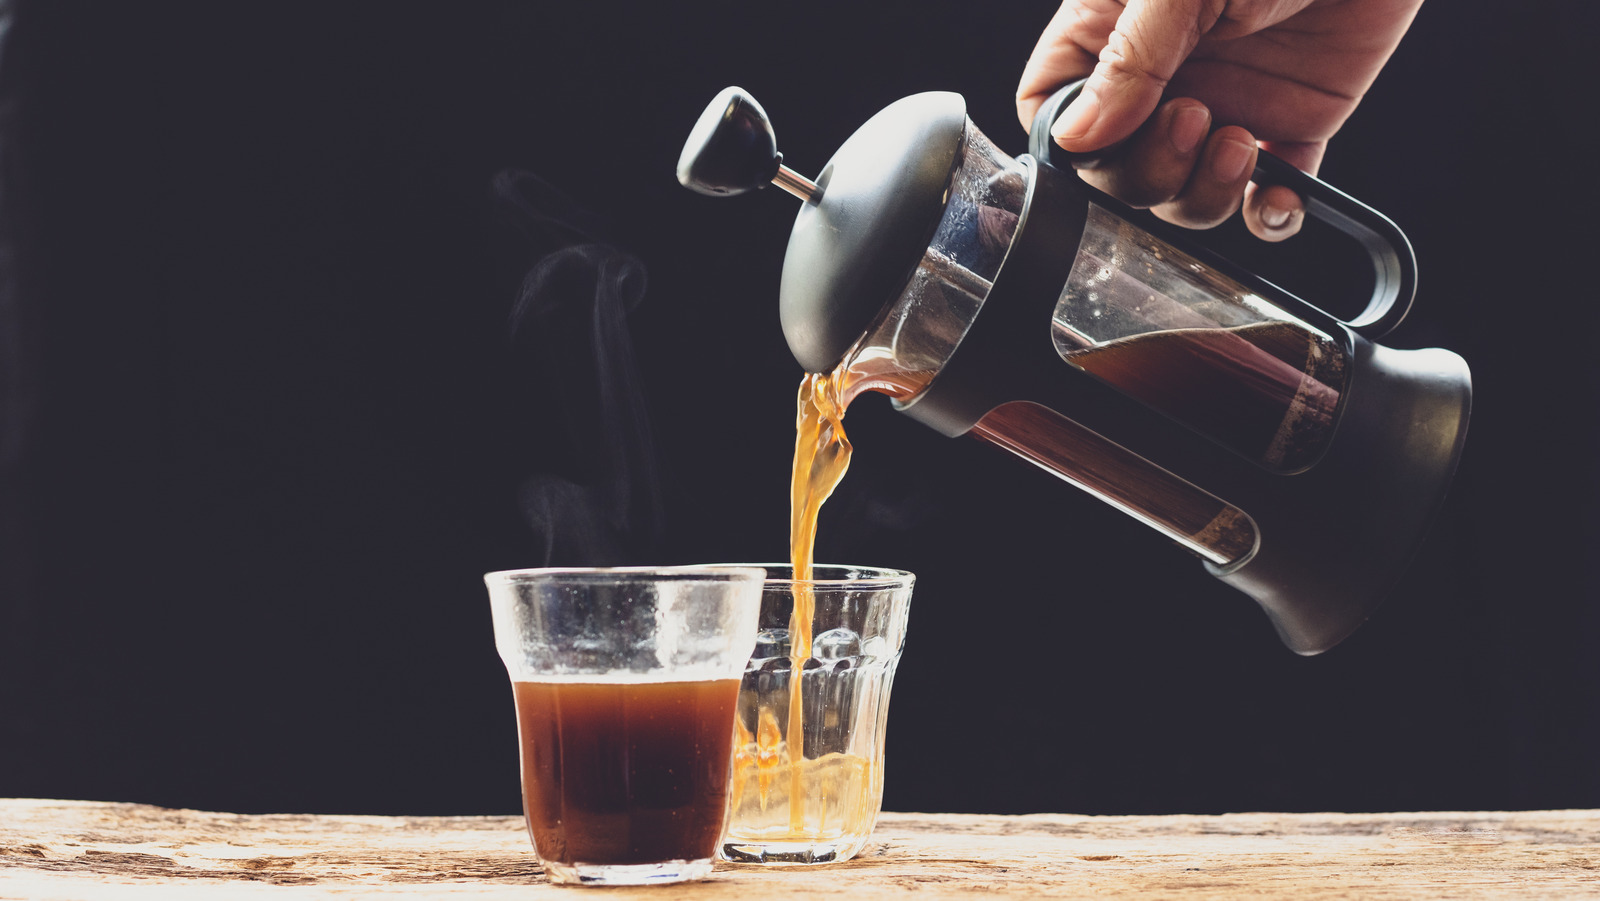 https://www.mashed.com/img/gallery/why-you-should-be-brewing-coffee-with-a-french-press/l-intro-1620769806.jpg